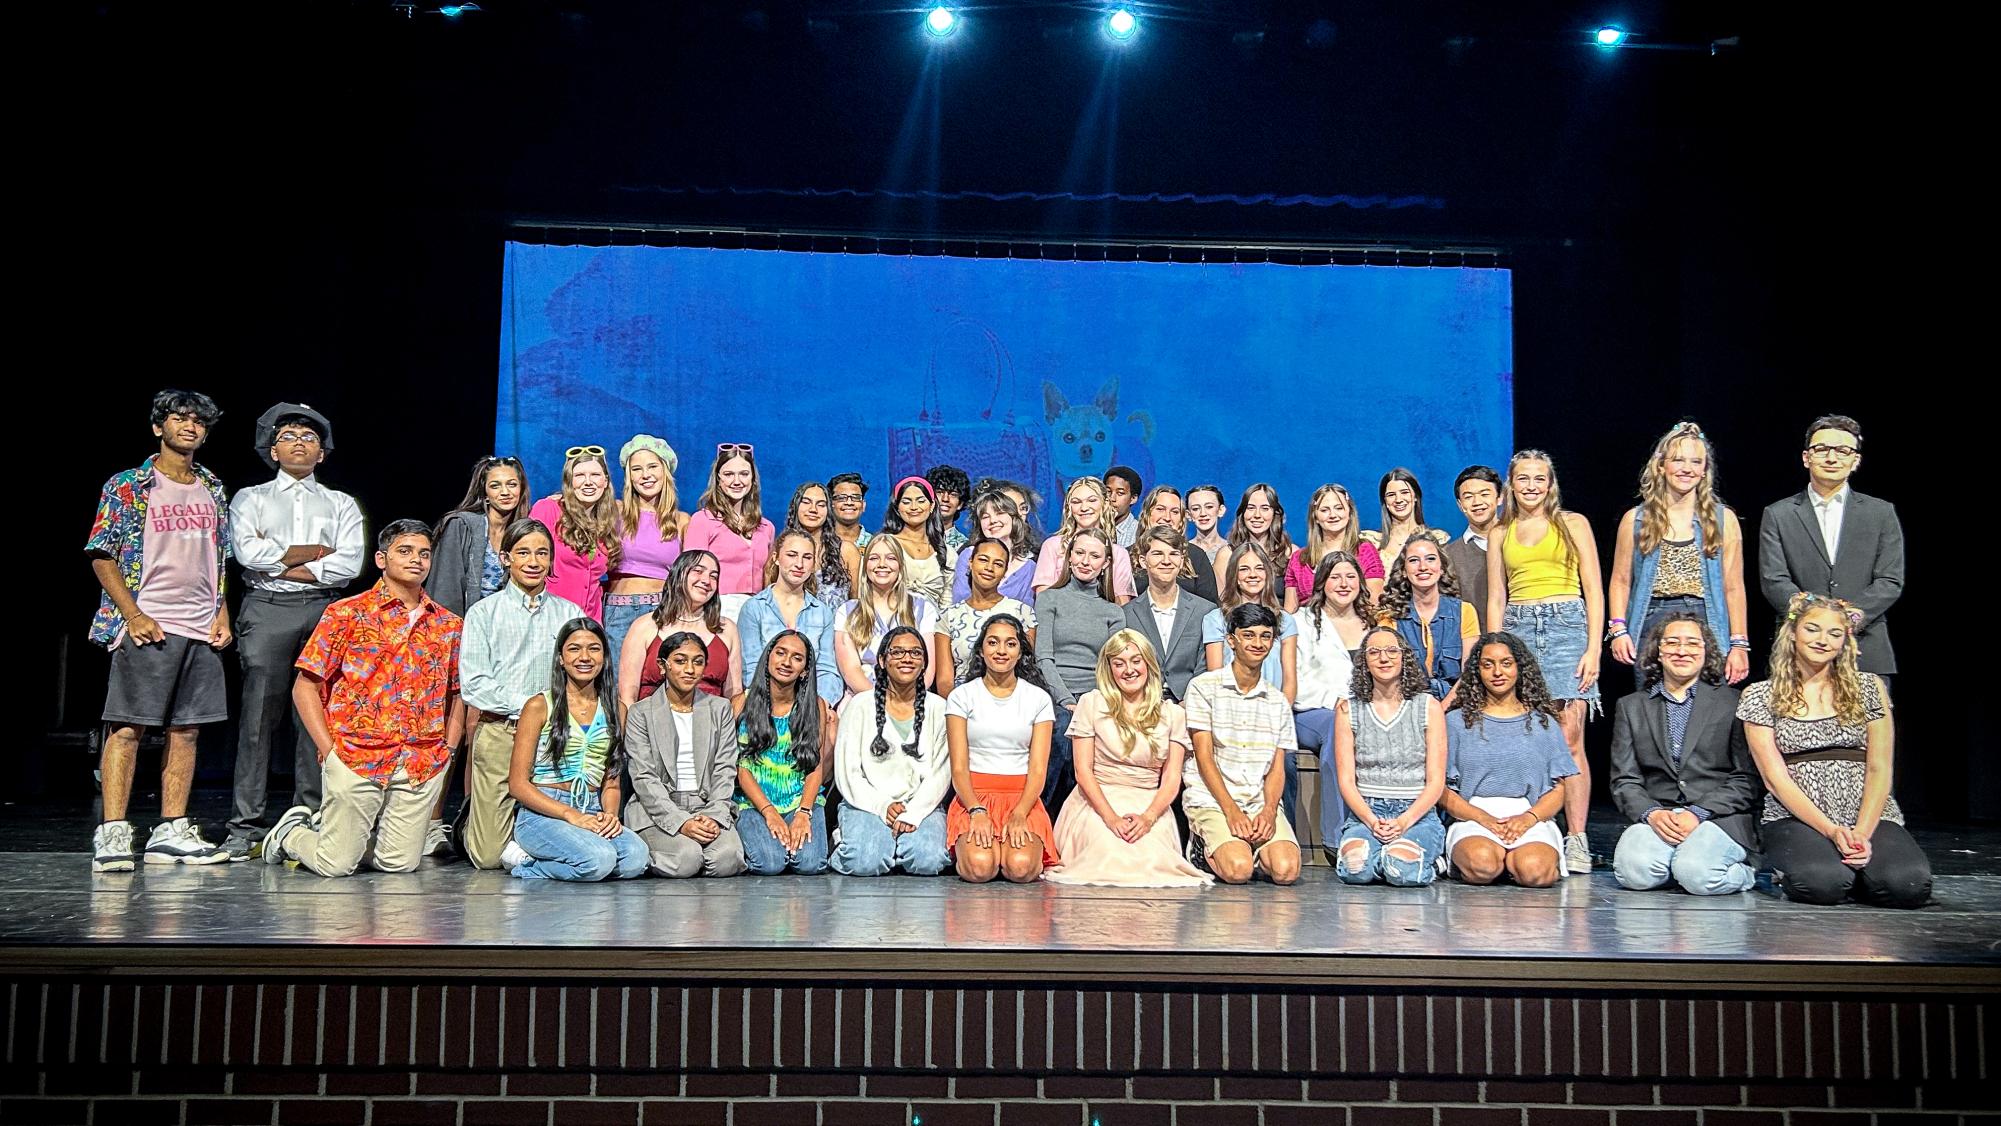 The cast of Denmark High Schools production of Legally Blonde: The Musical JR.